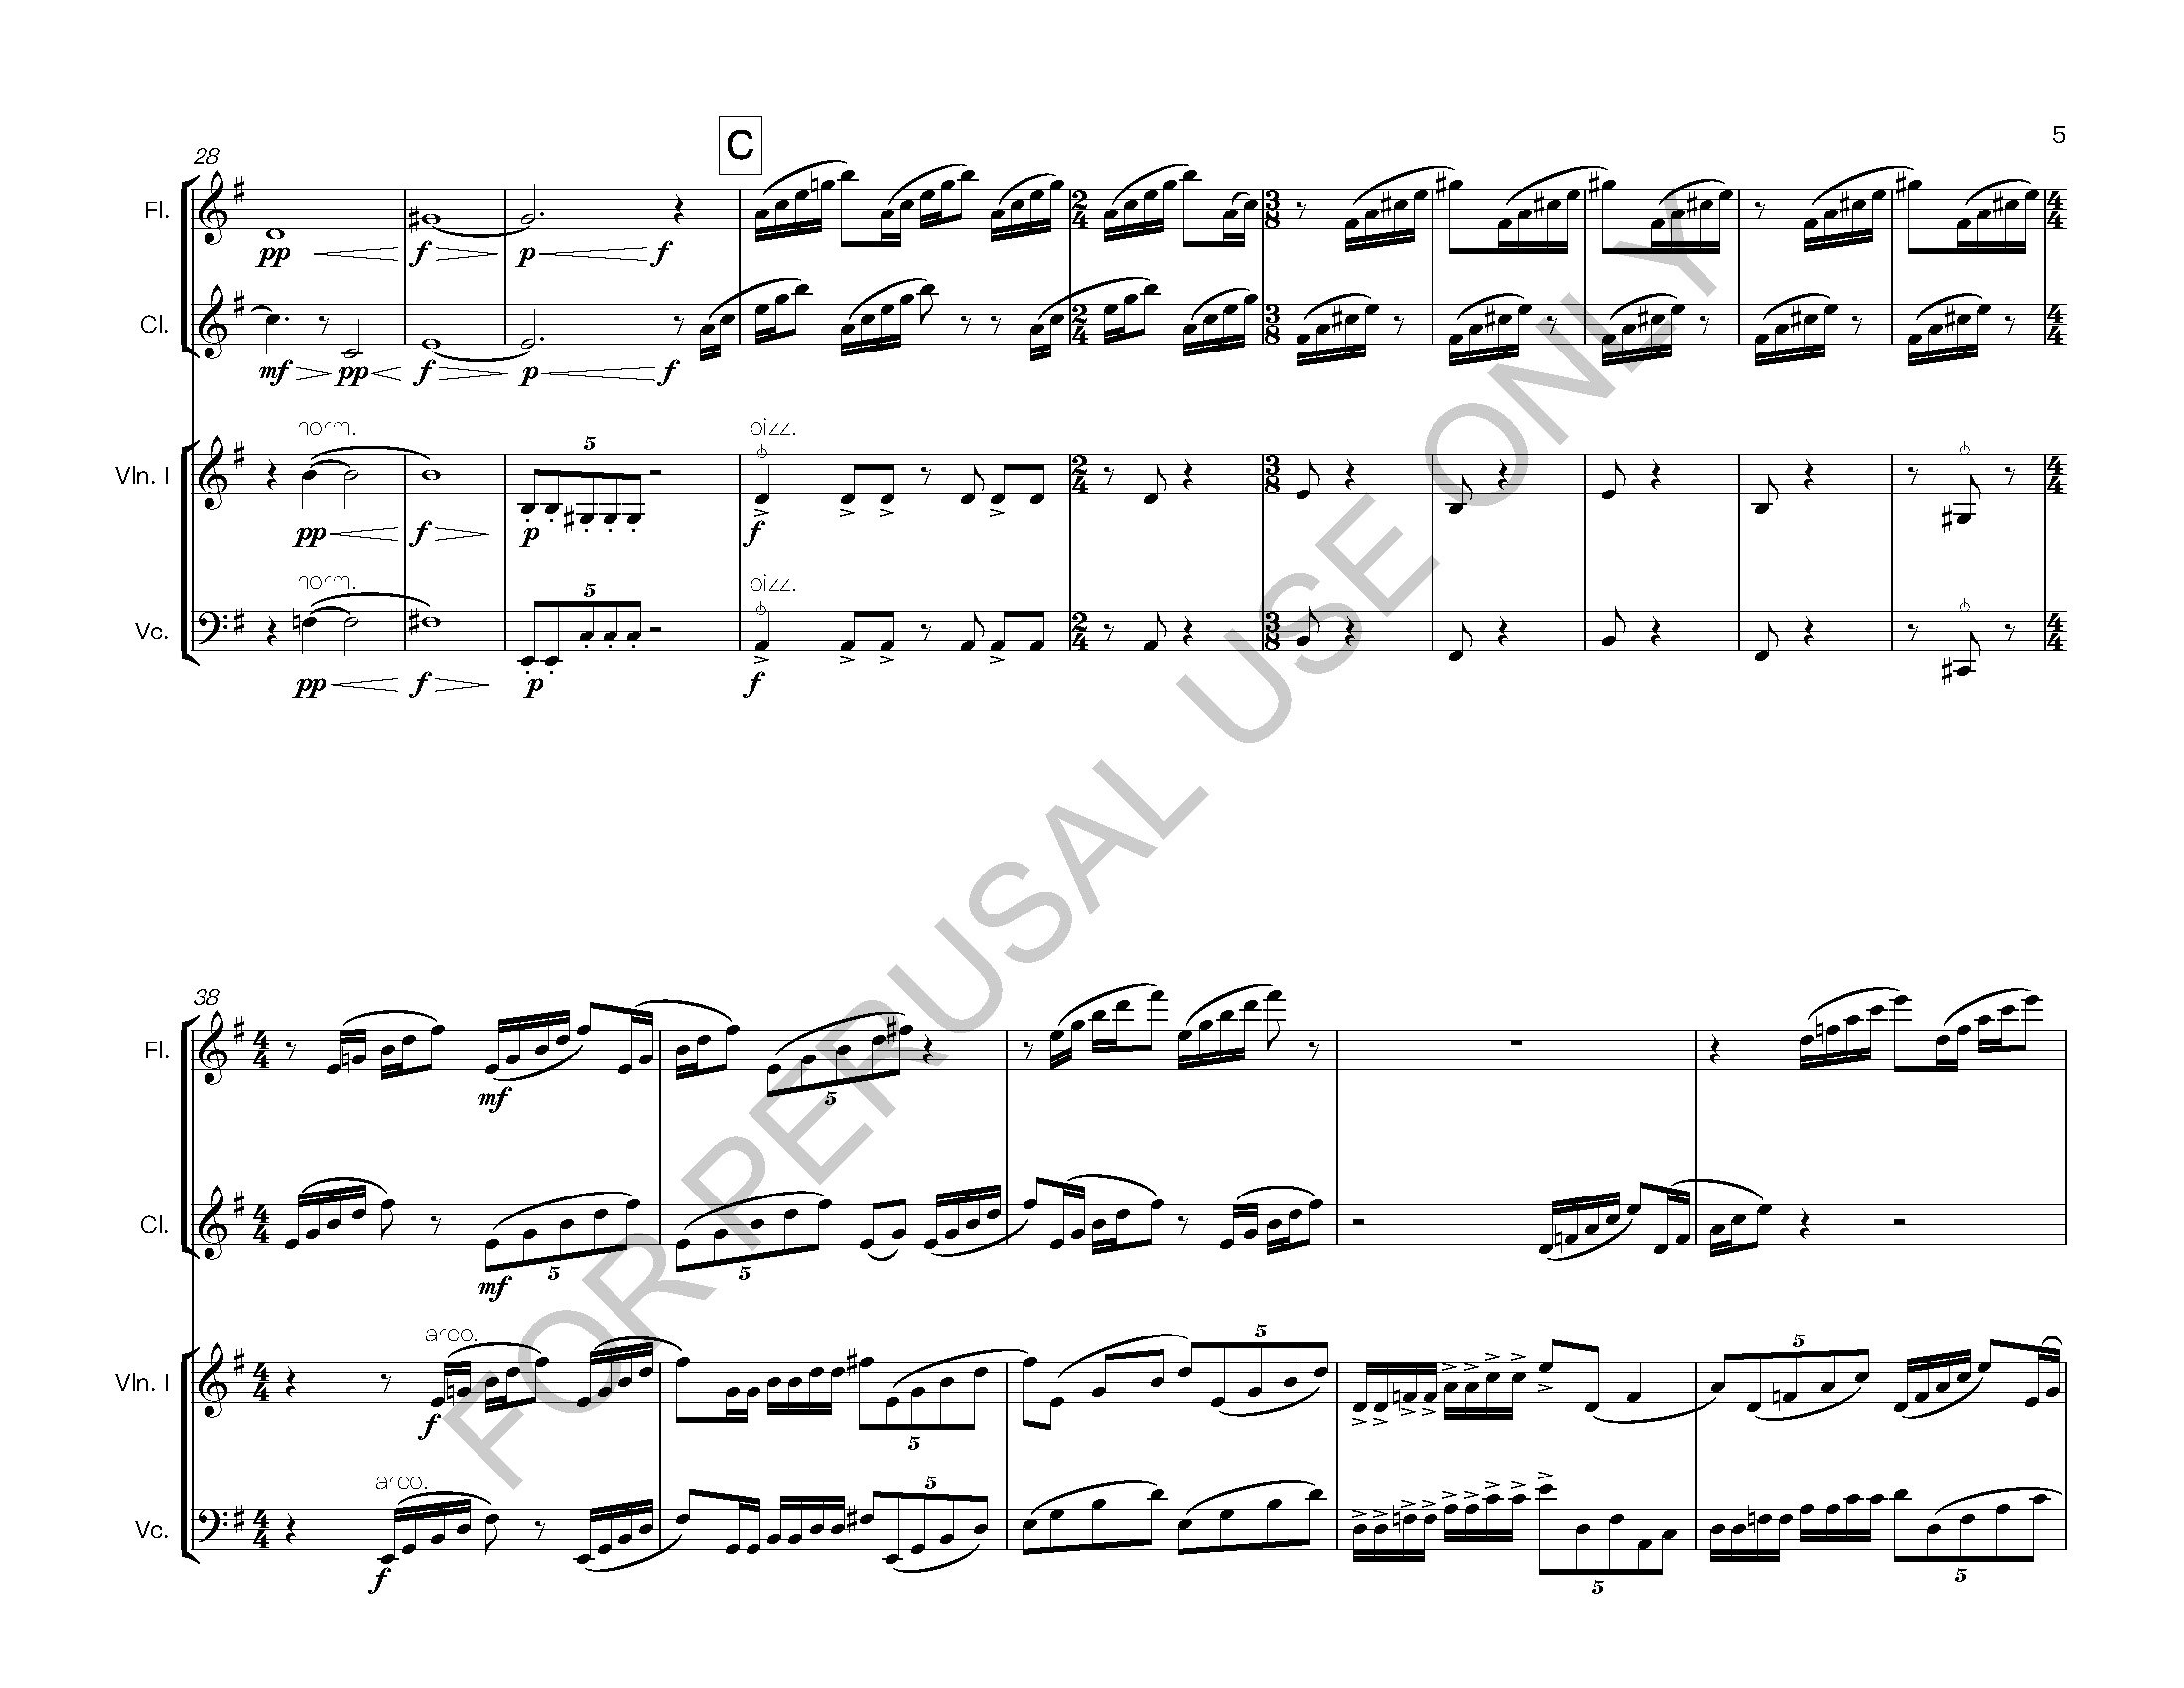 Thread the Needle - Full Score in C_Page_05.jpg